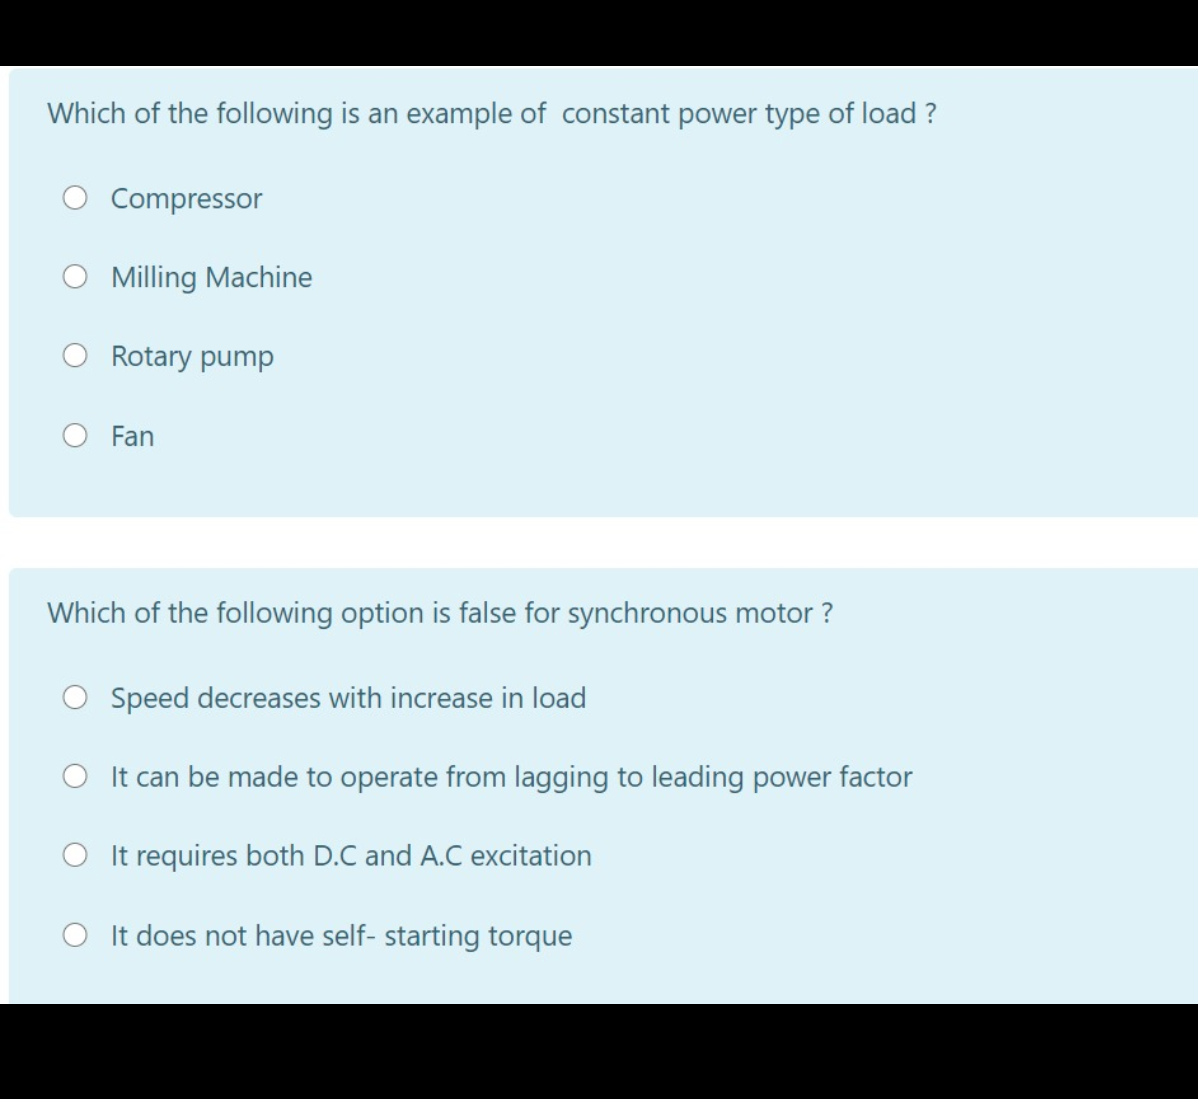 Which of the following is an example of constant power type of load ?
Compressor
O Milling Machine
Rotary pump
Fan
Which of the following option is false for synchronous motor ?
O Speed decreases with increase in load
O It can be made to operate from lagging to leading power factor
O It requires both D.C and A.C excitation
O It does not have self- starting torque
